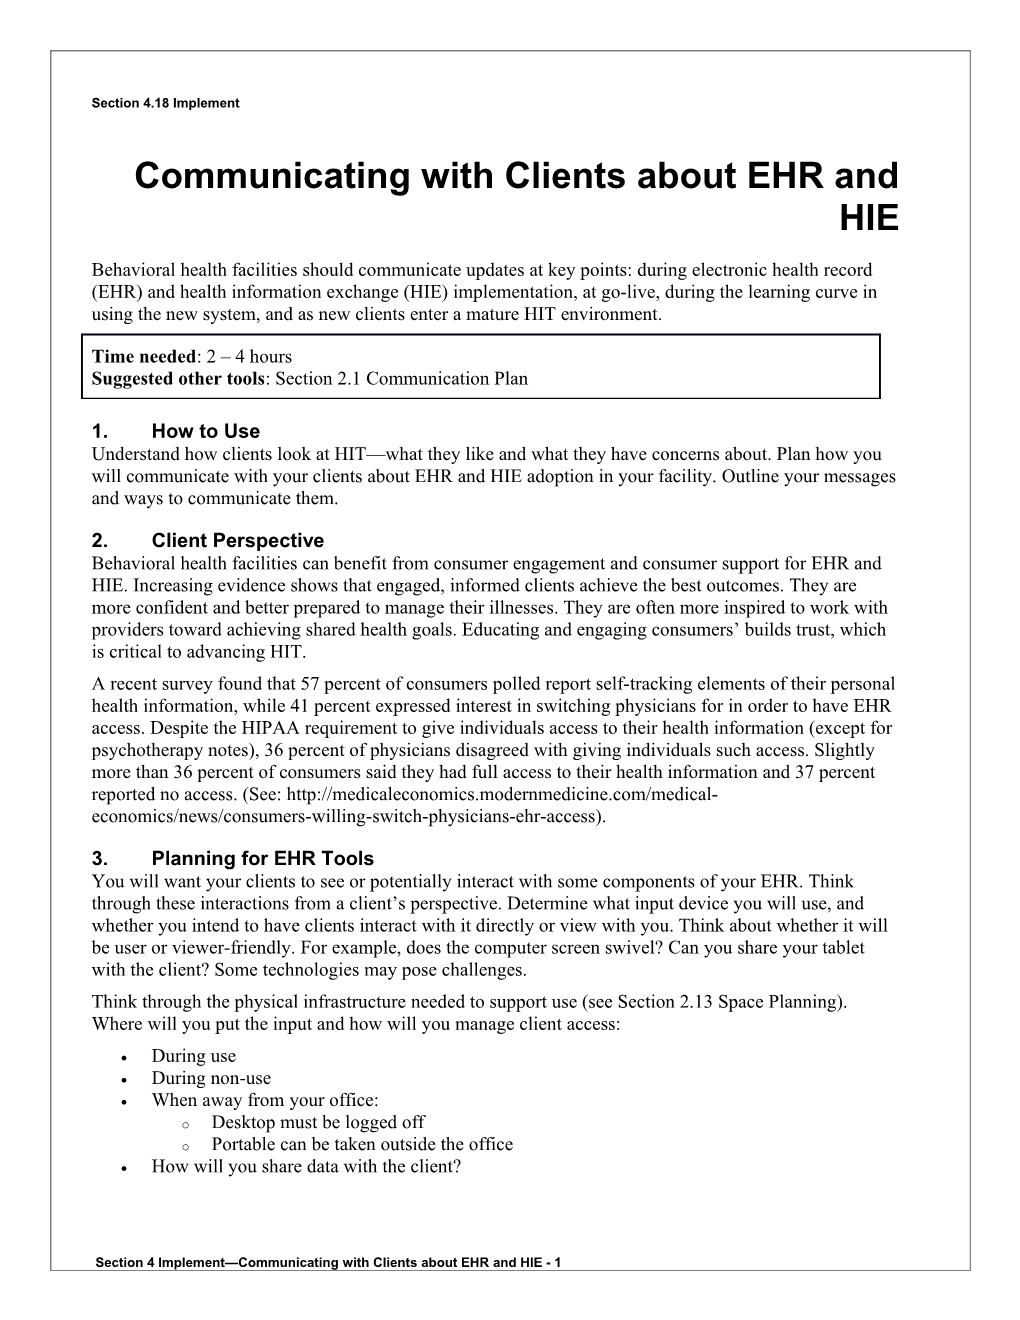 4 Communicating with Clients About EHR and HIE